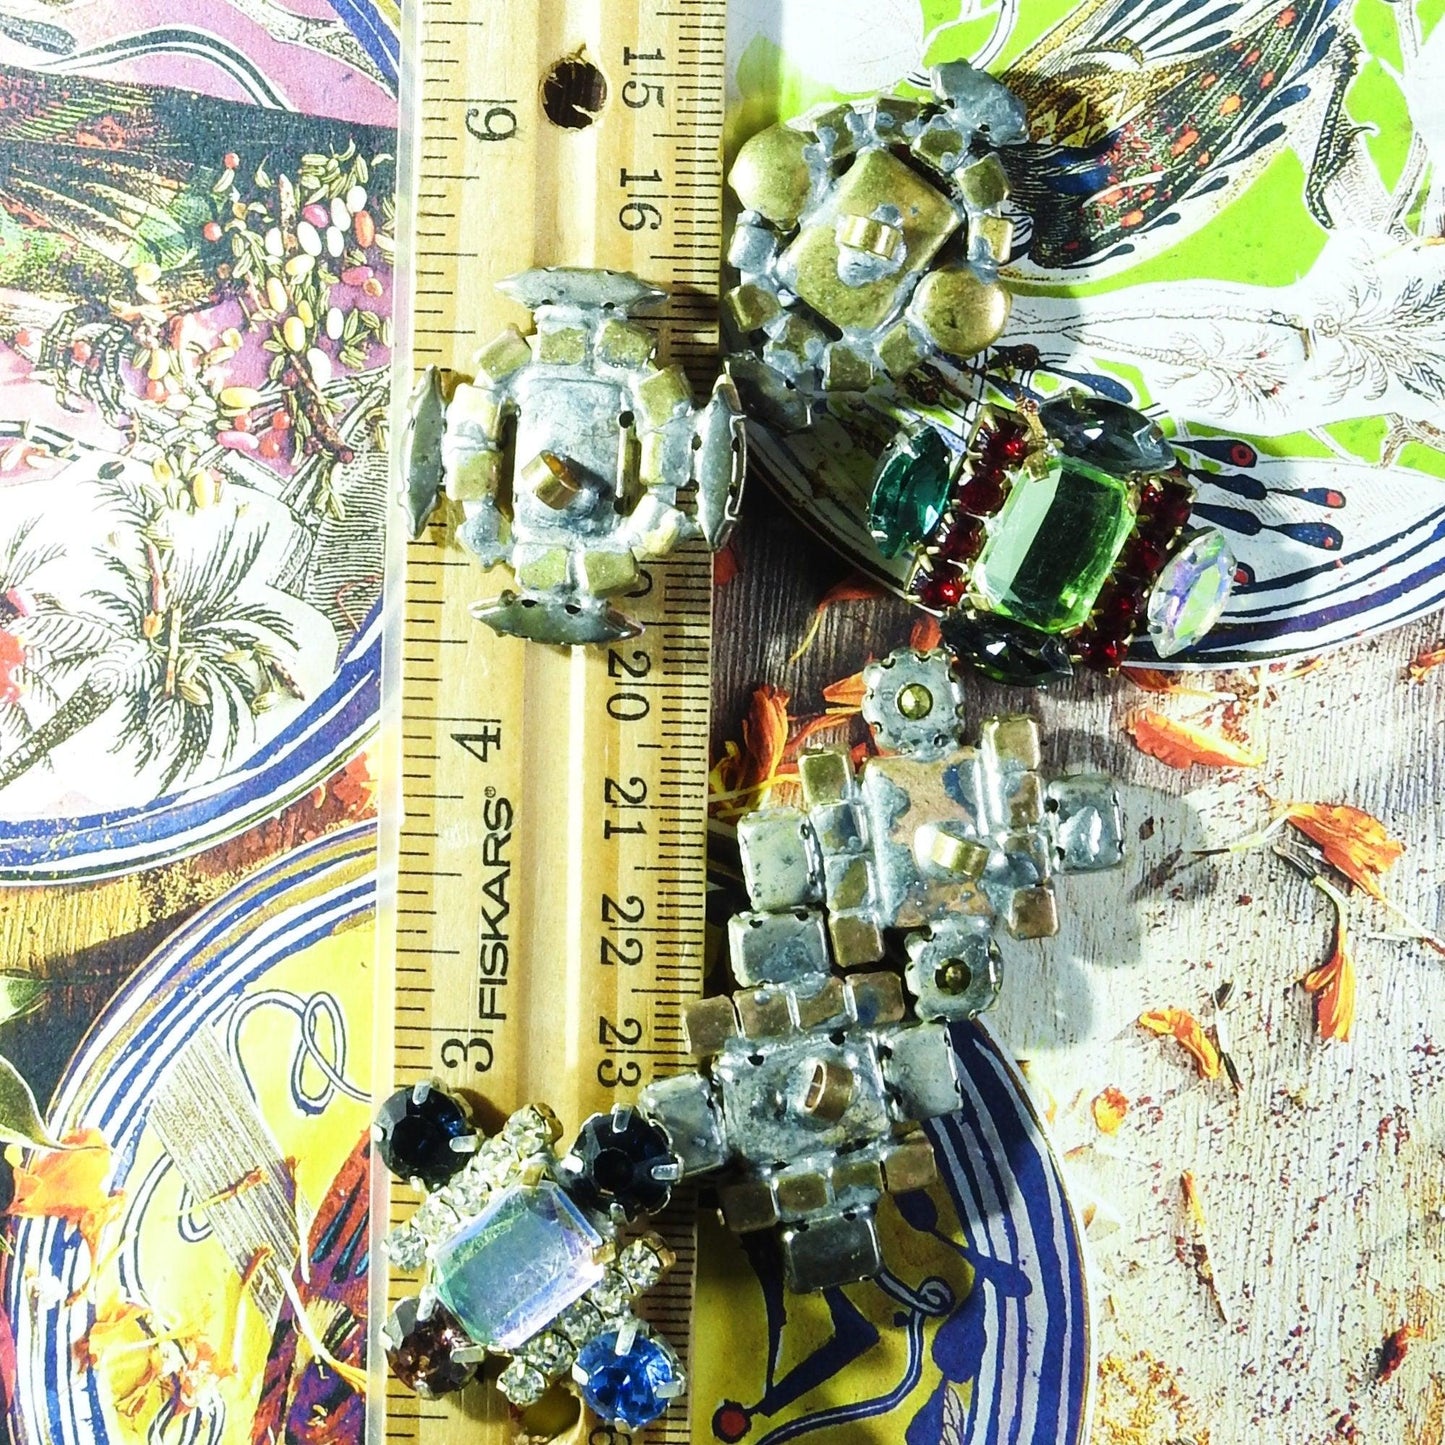 Lot of 8 fancy glass shank buttons, handmade with genuine Czech crystals. Good for sewing and jewelry making. For creators and designers.